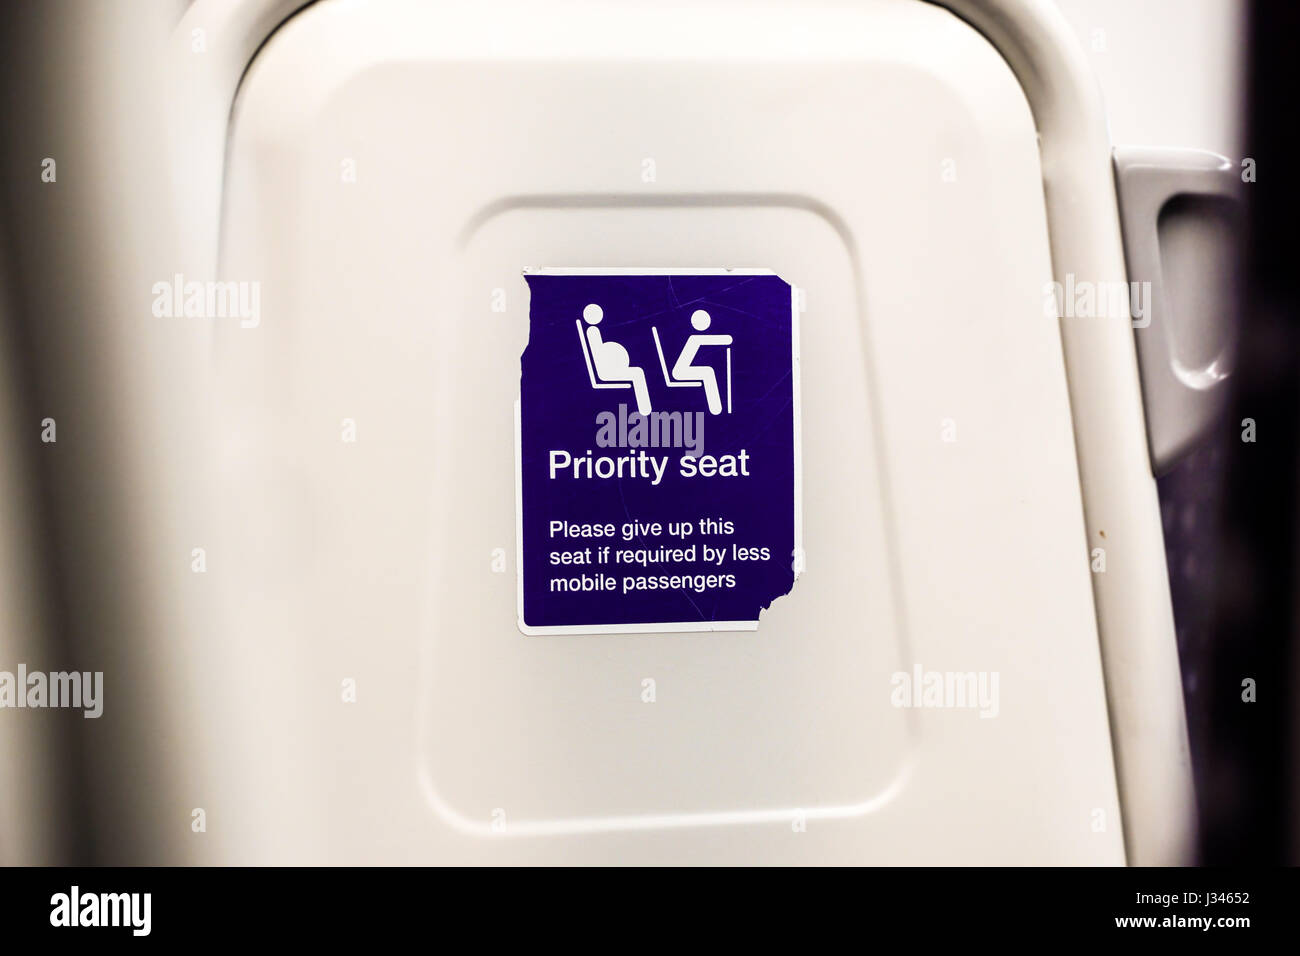 Priority seats in airport. Stock Photo